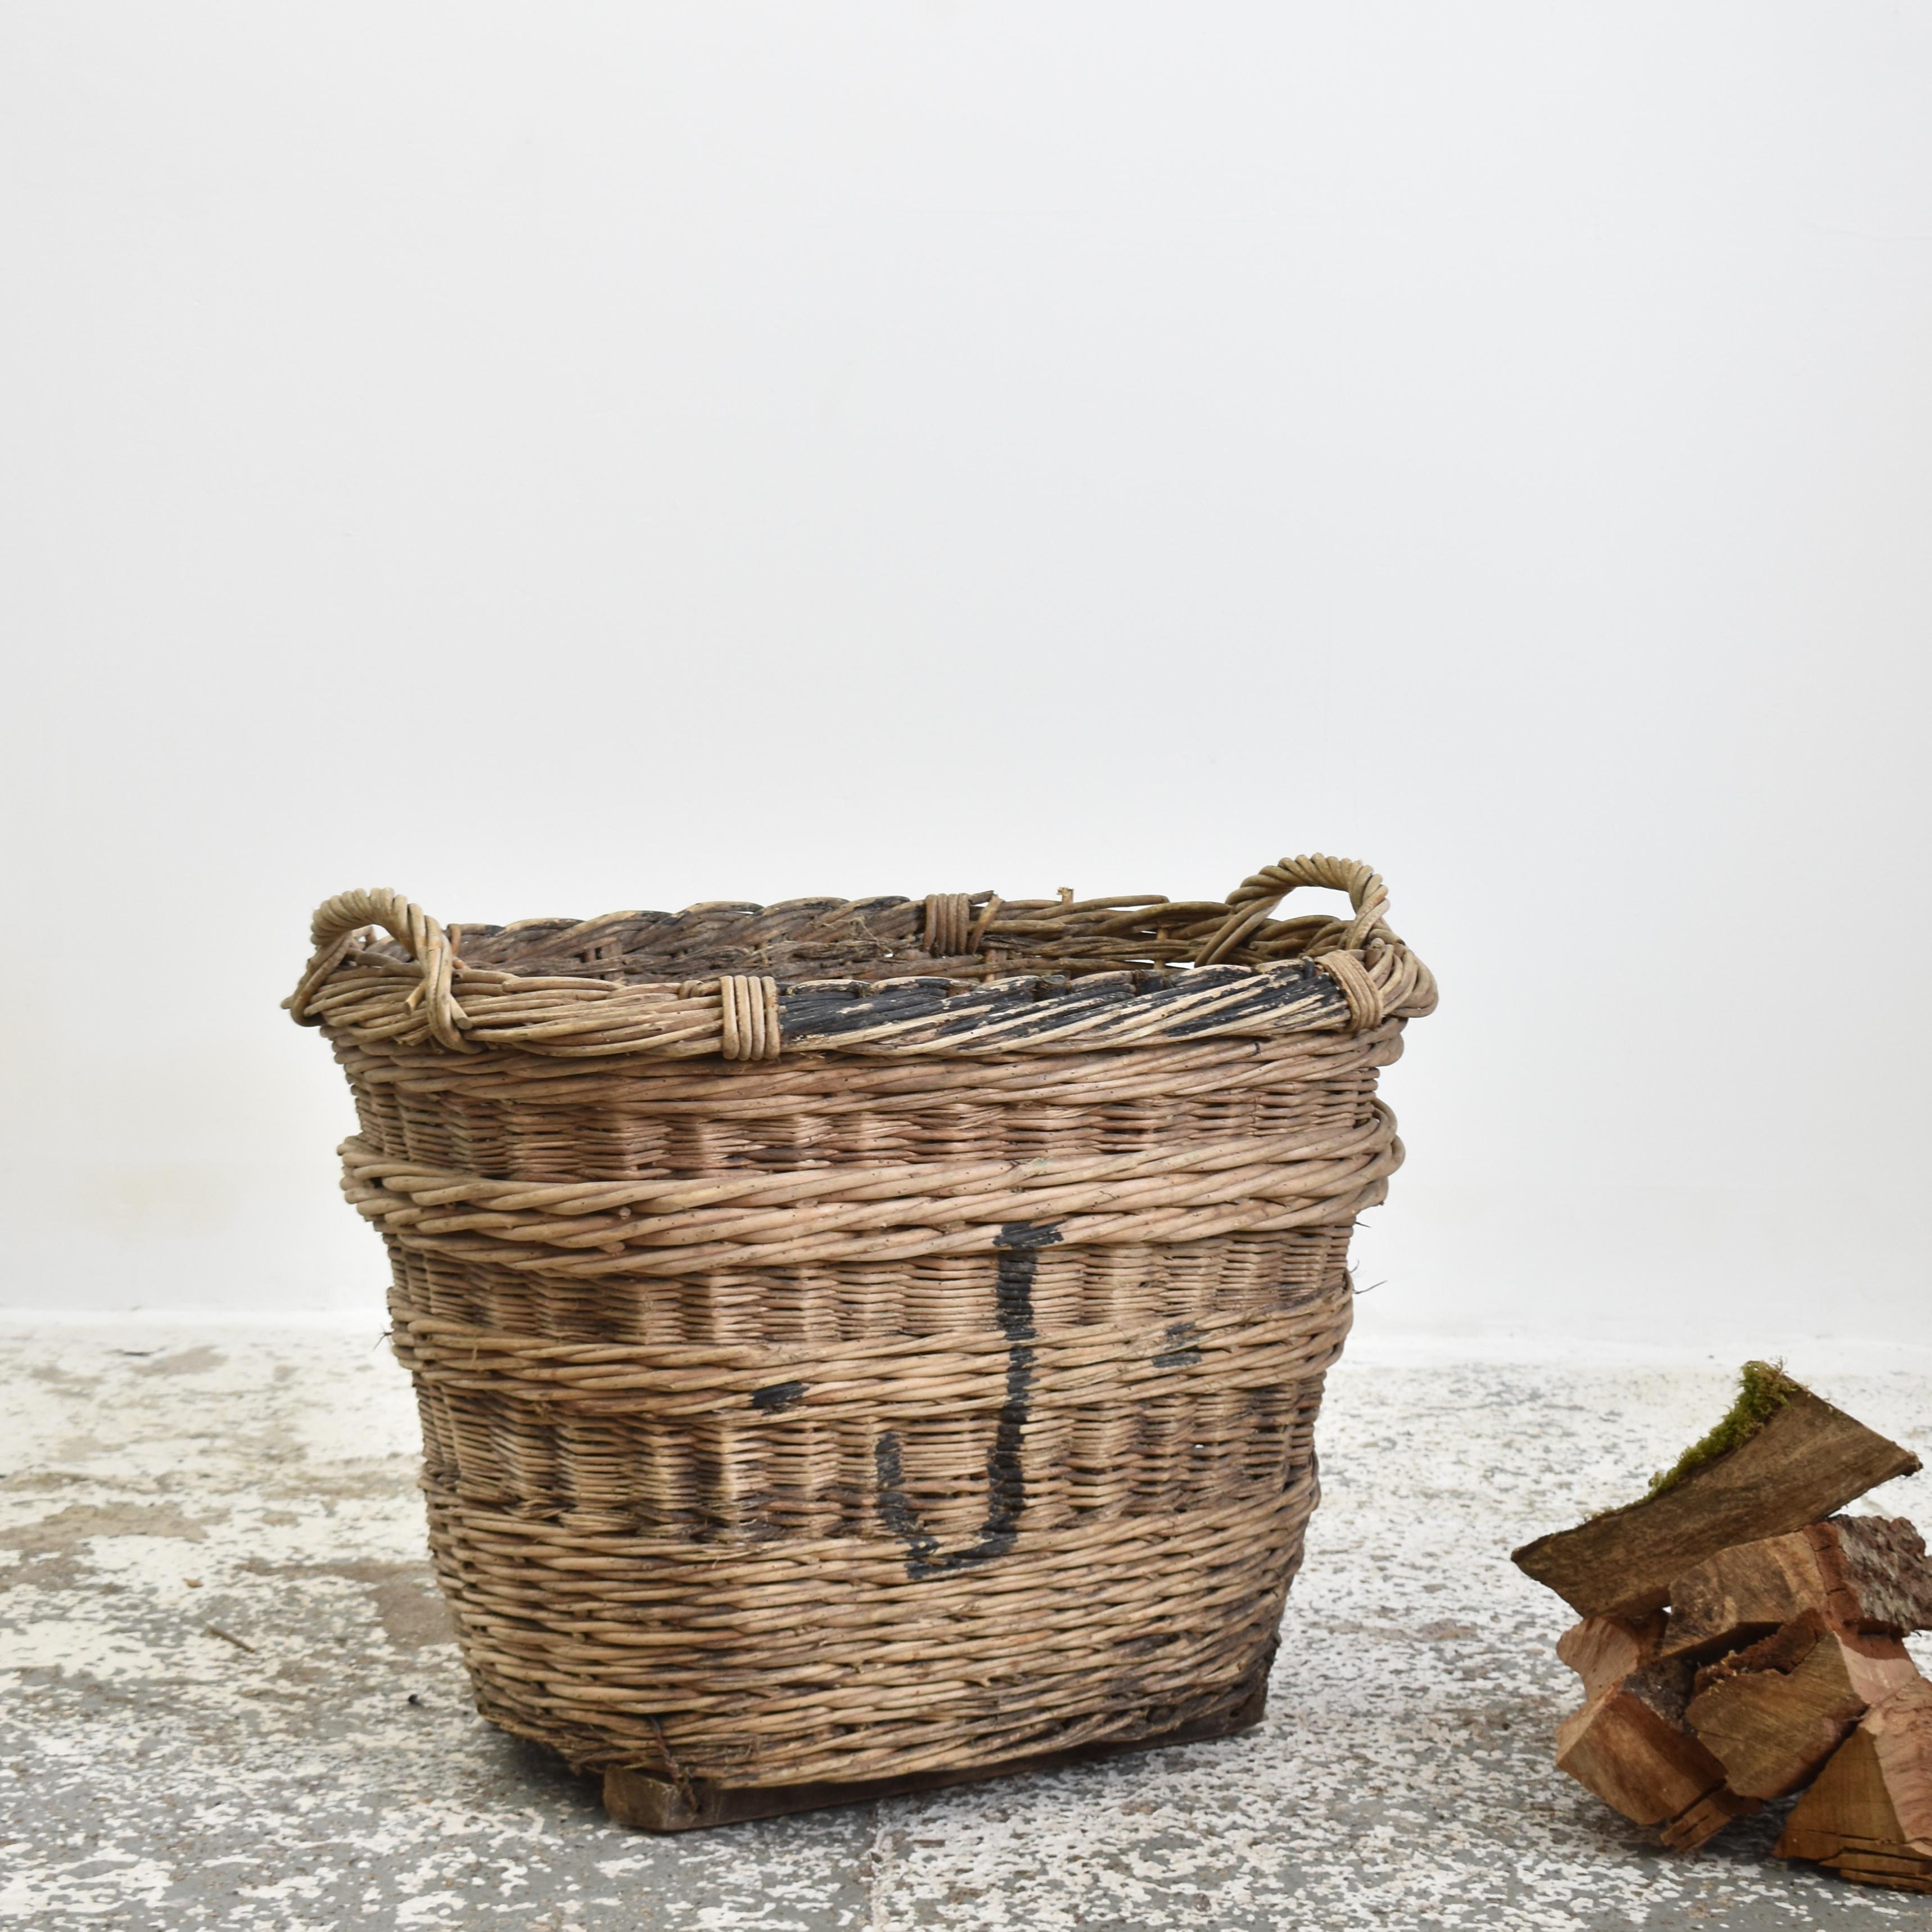 Large Antique Champagne Harvest Basket – L

A beautiful hand-made wicker champagne basket from France used to harvest grapes in the champagne region of Reims. The markings on the end identify the grower and vineyard it belonged to. The basket has